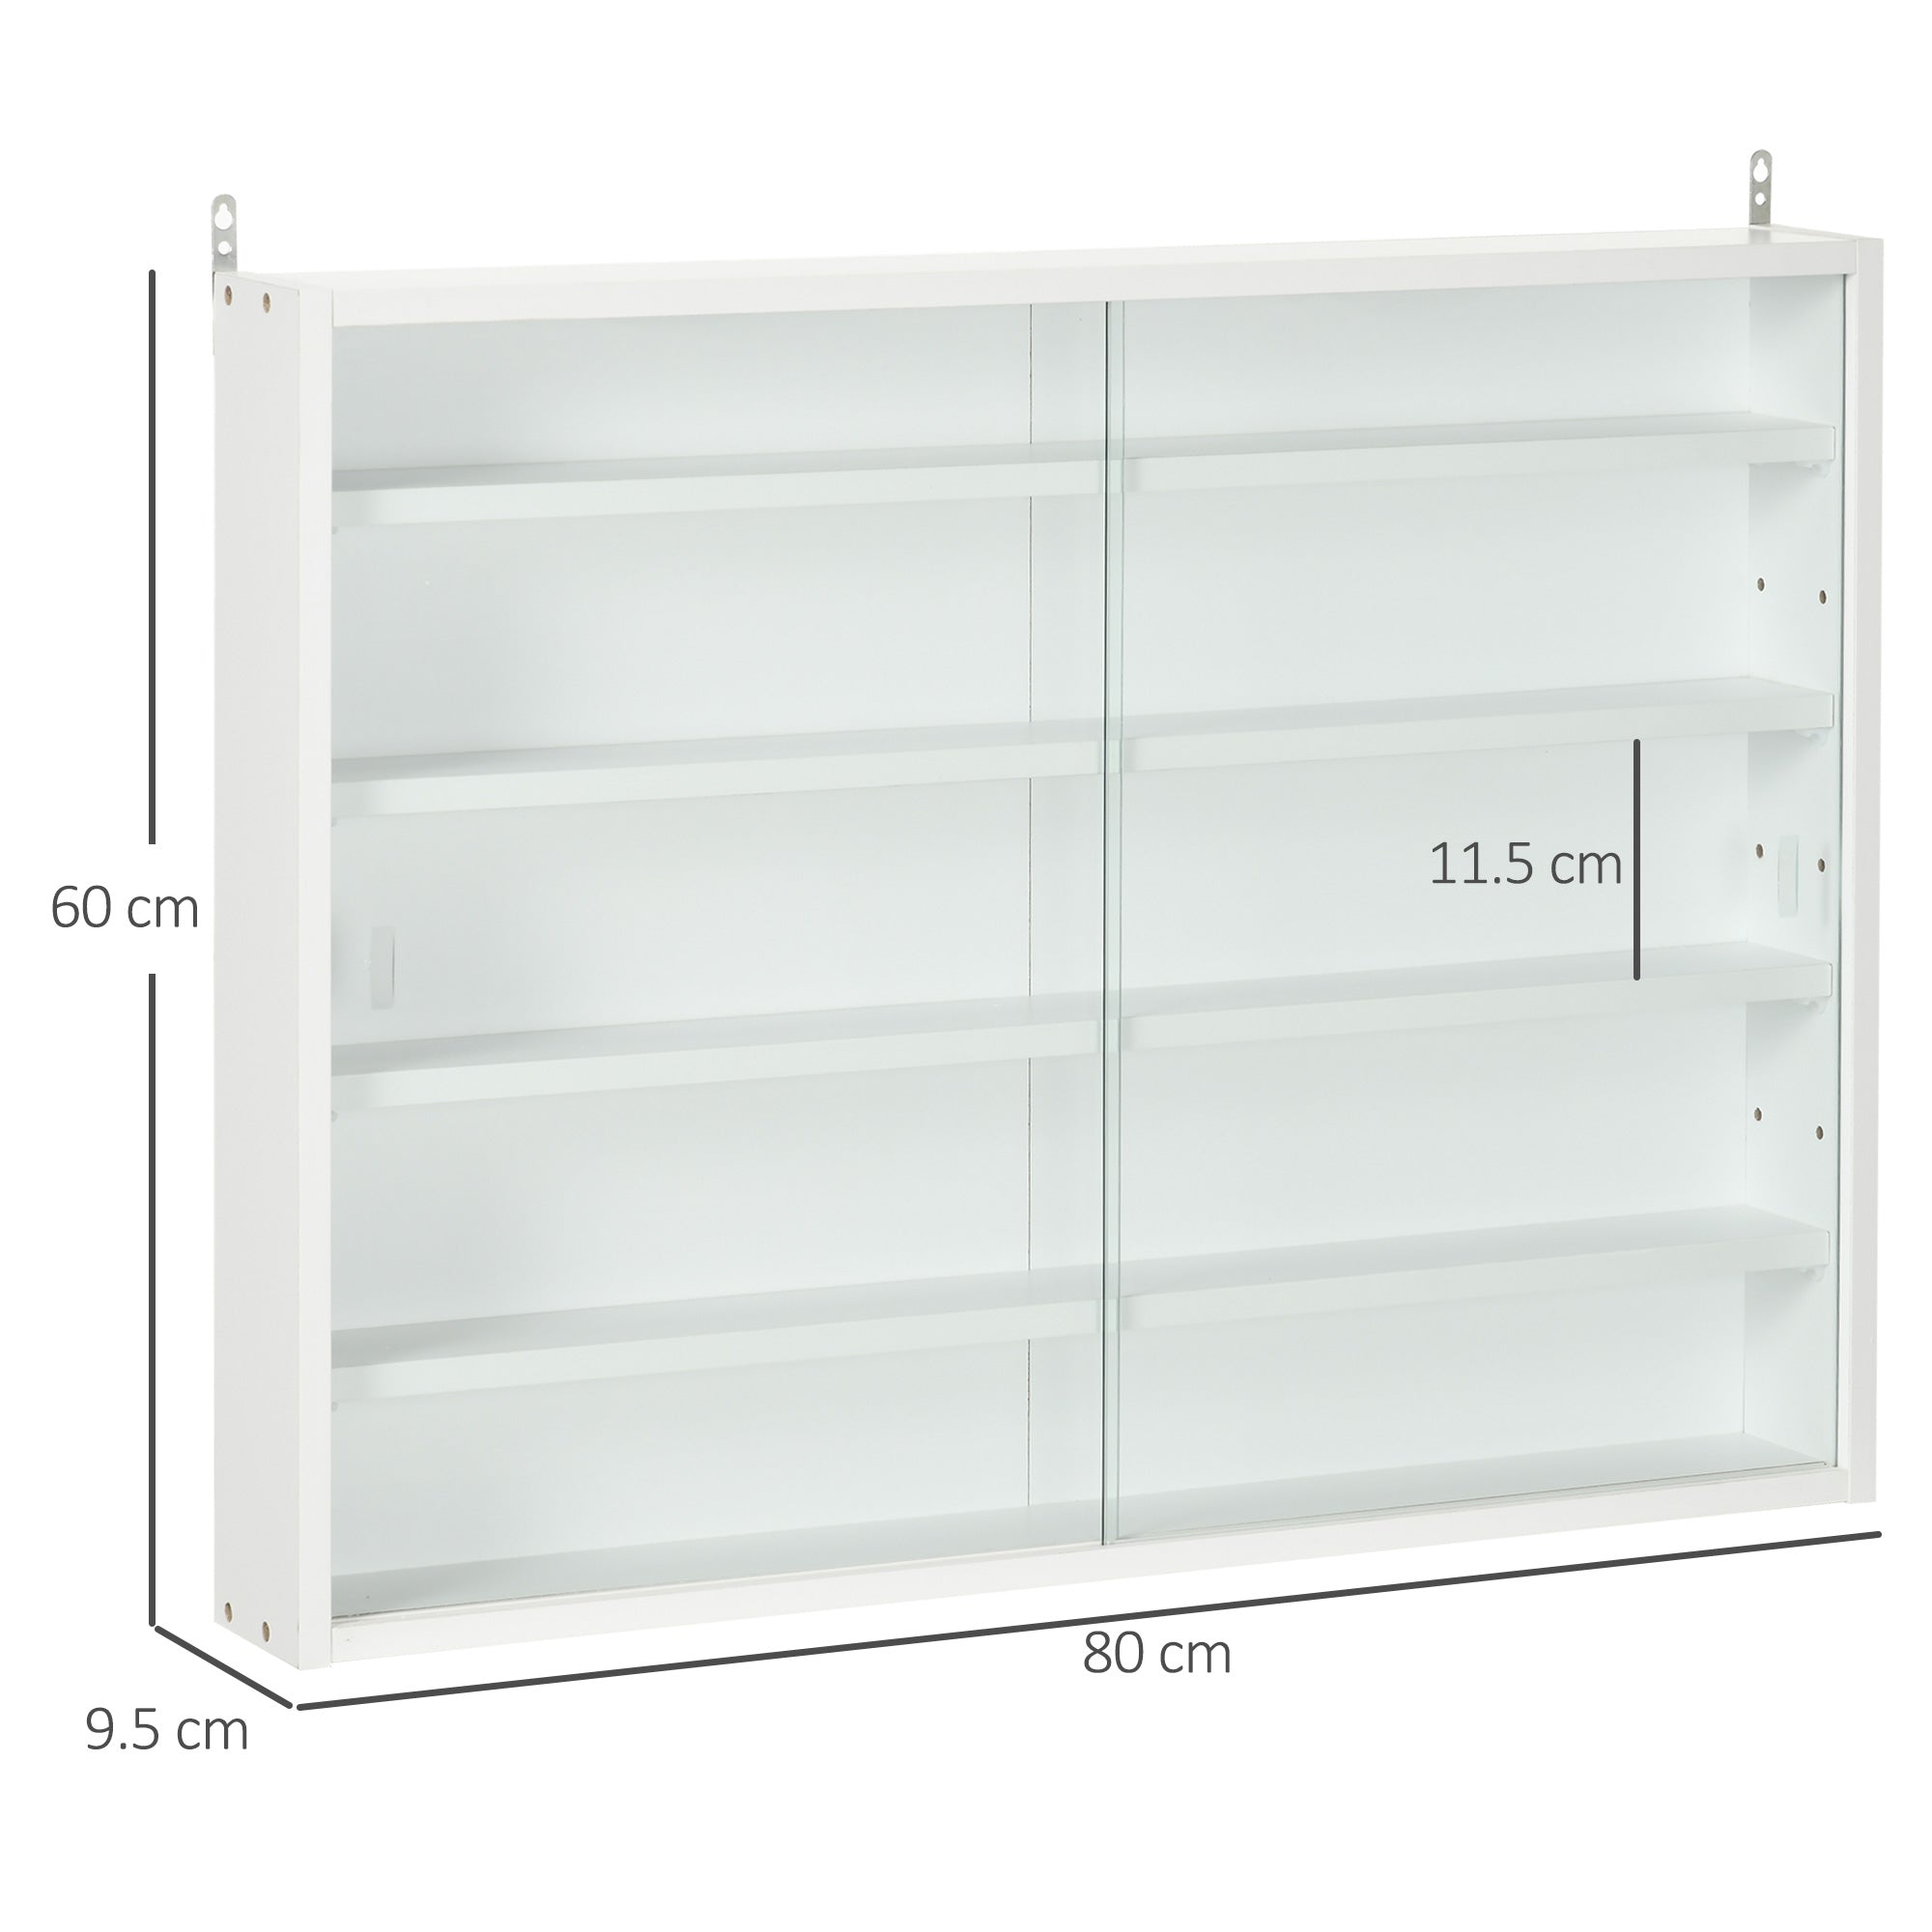 5-Tier Wall Display Shelf Unit Cabinet w/ 4 Adjustable Shelves Glass Doors Home Office Ornaments 60x80cm White-2